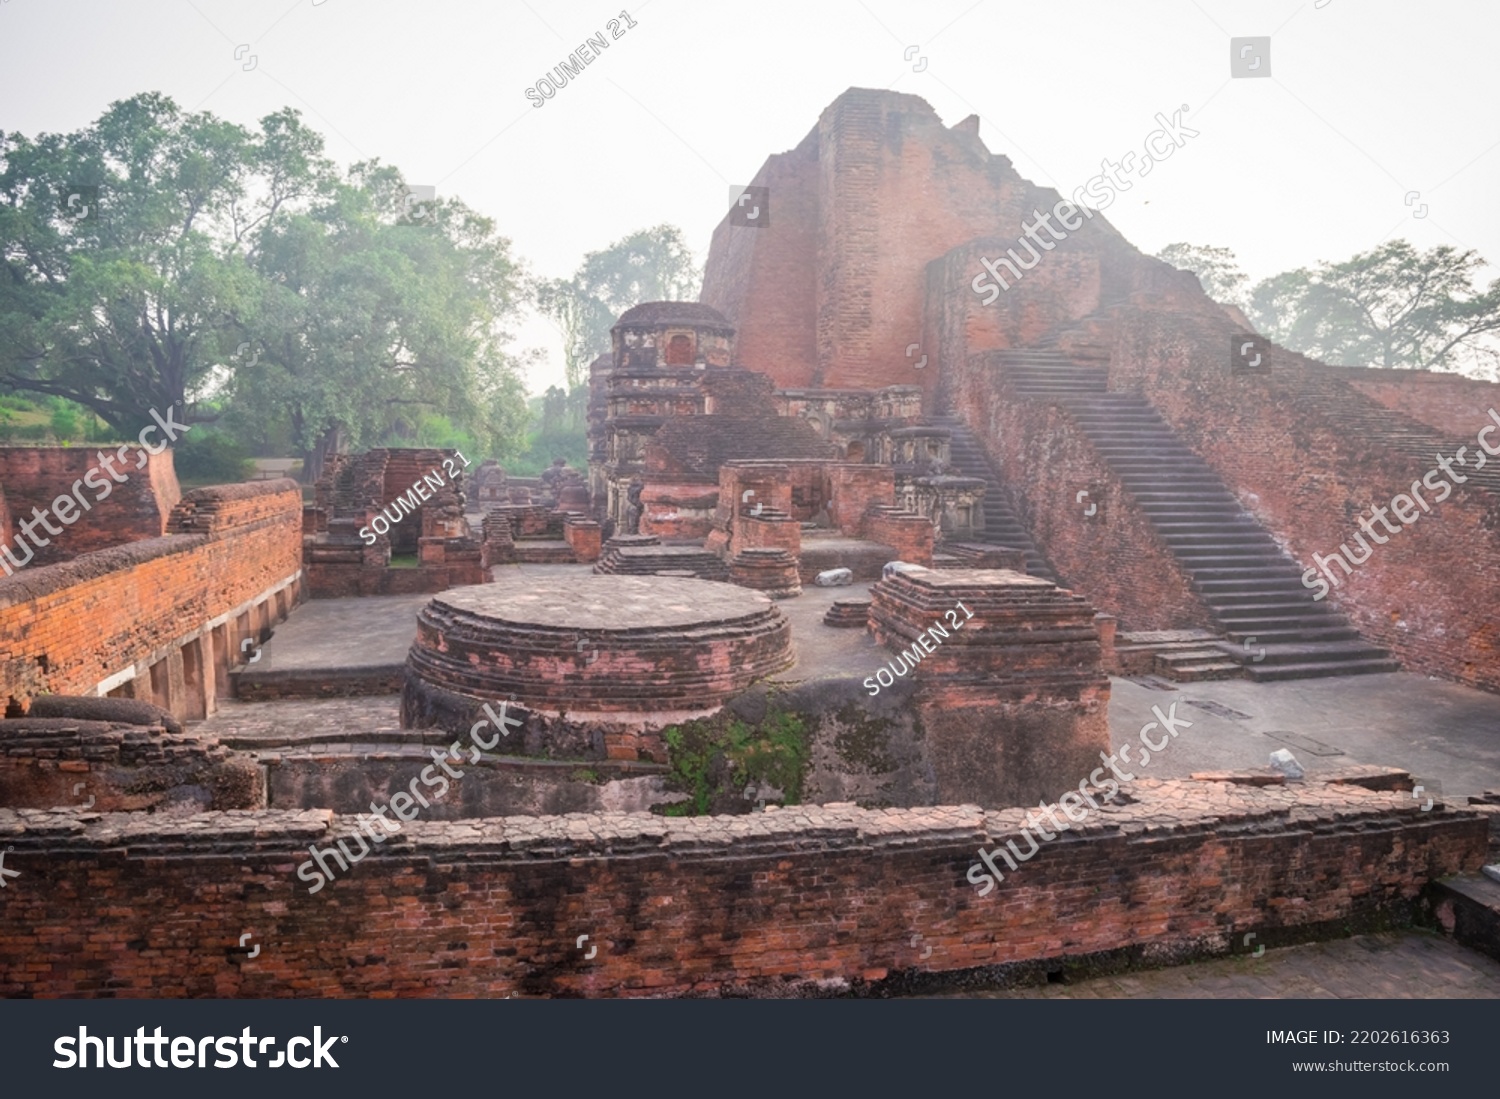 Nalanda is a famous Buddhist university of ancient India. It is located in the Indian state of Bihar. It is the world's first residential university. It was studied from 5th century to 13th century. #2202616363